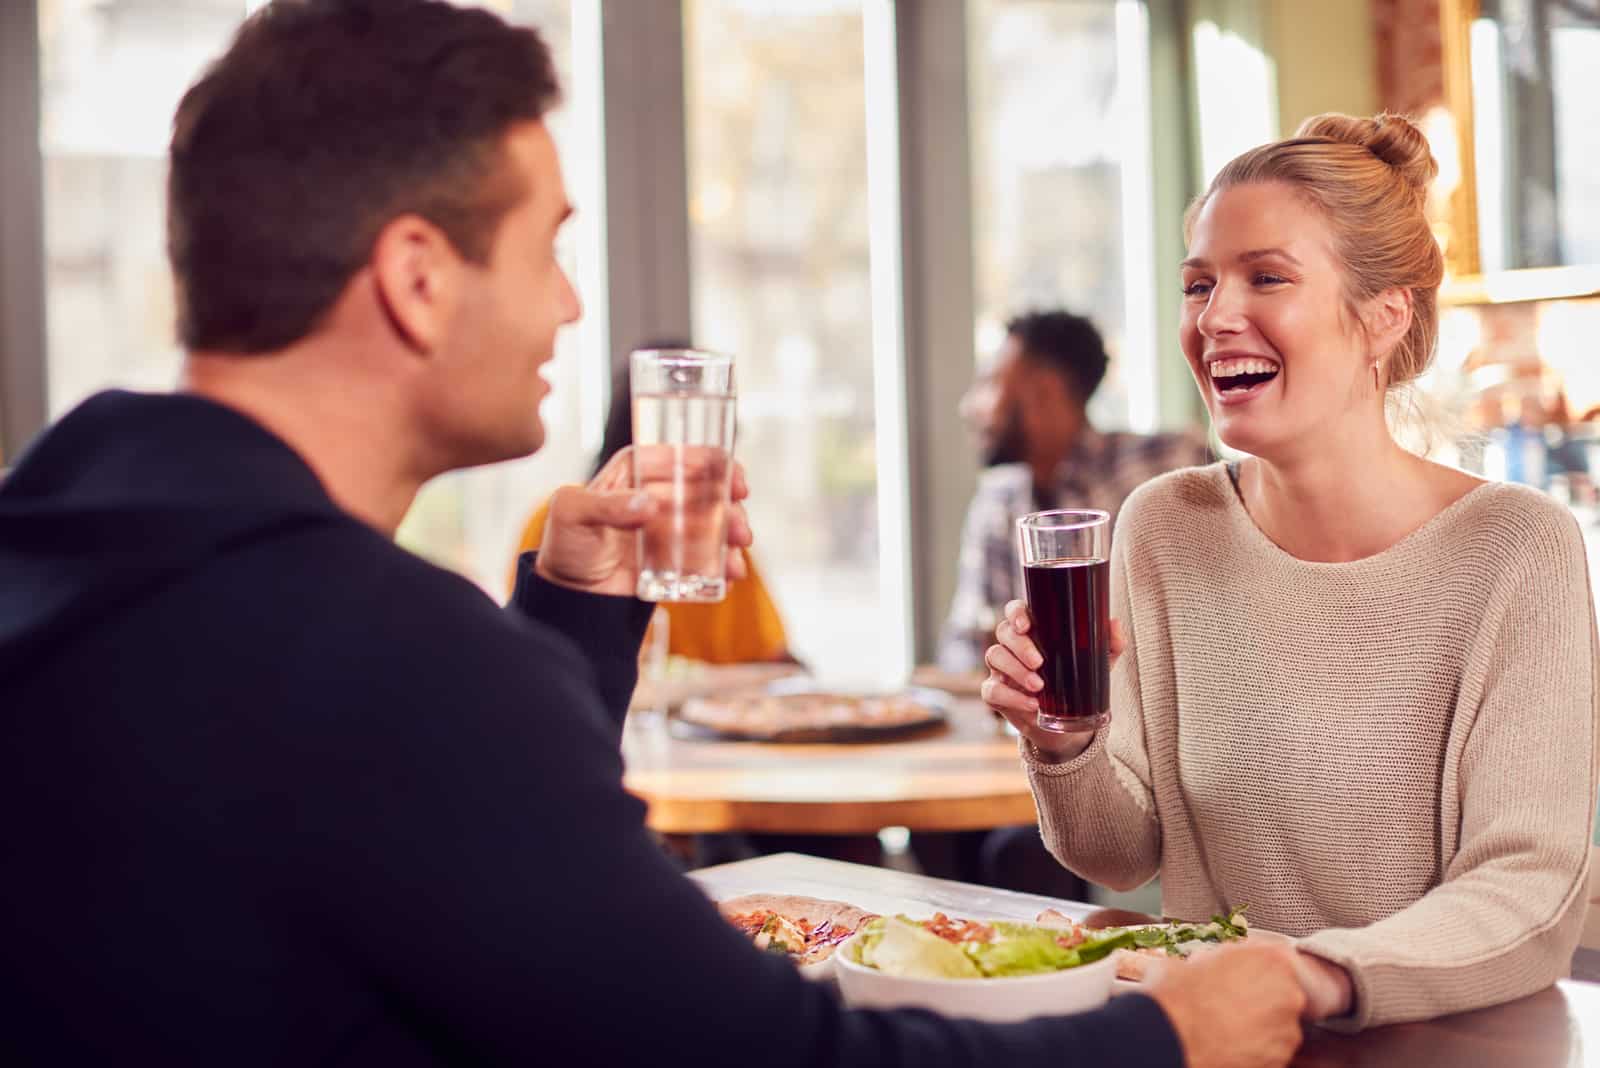 smiling couple on date enjoying pizza in restaurant together